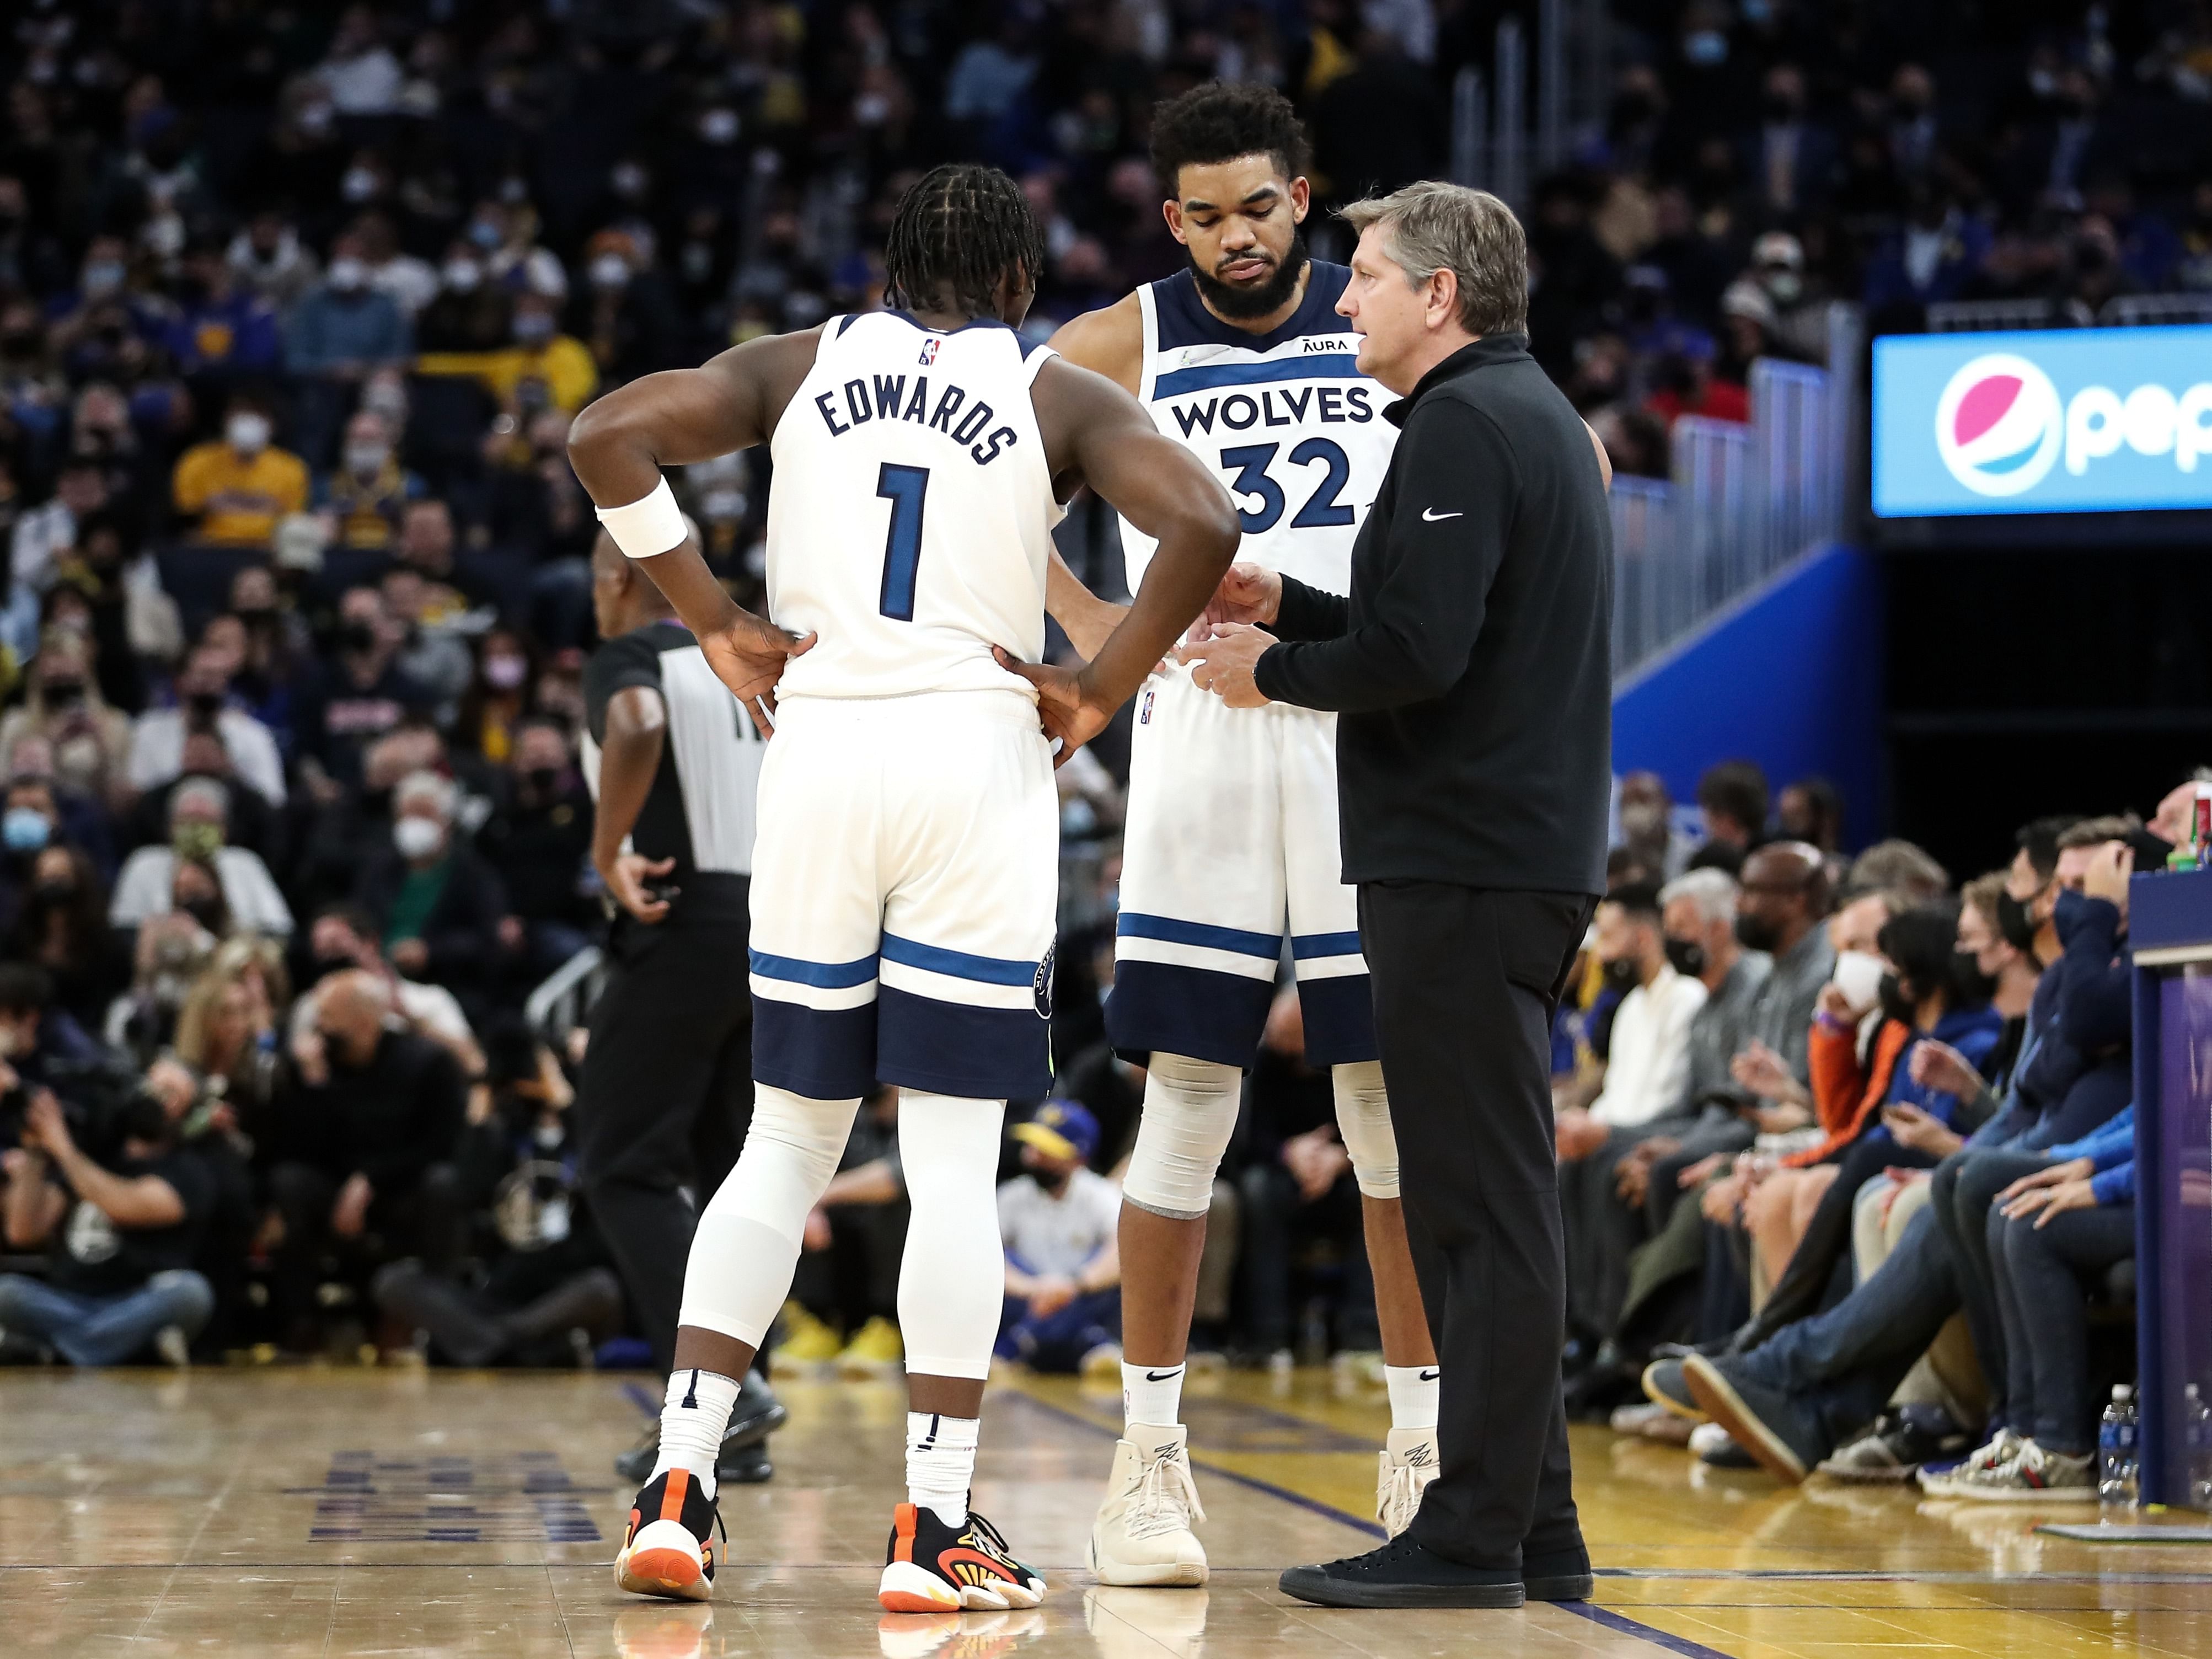 Can the Minnesota Timberwolves make it into 2023 NBA playoffs? Looking